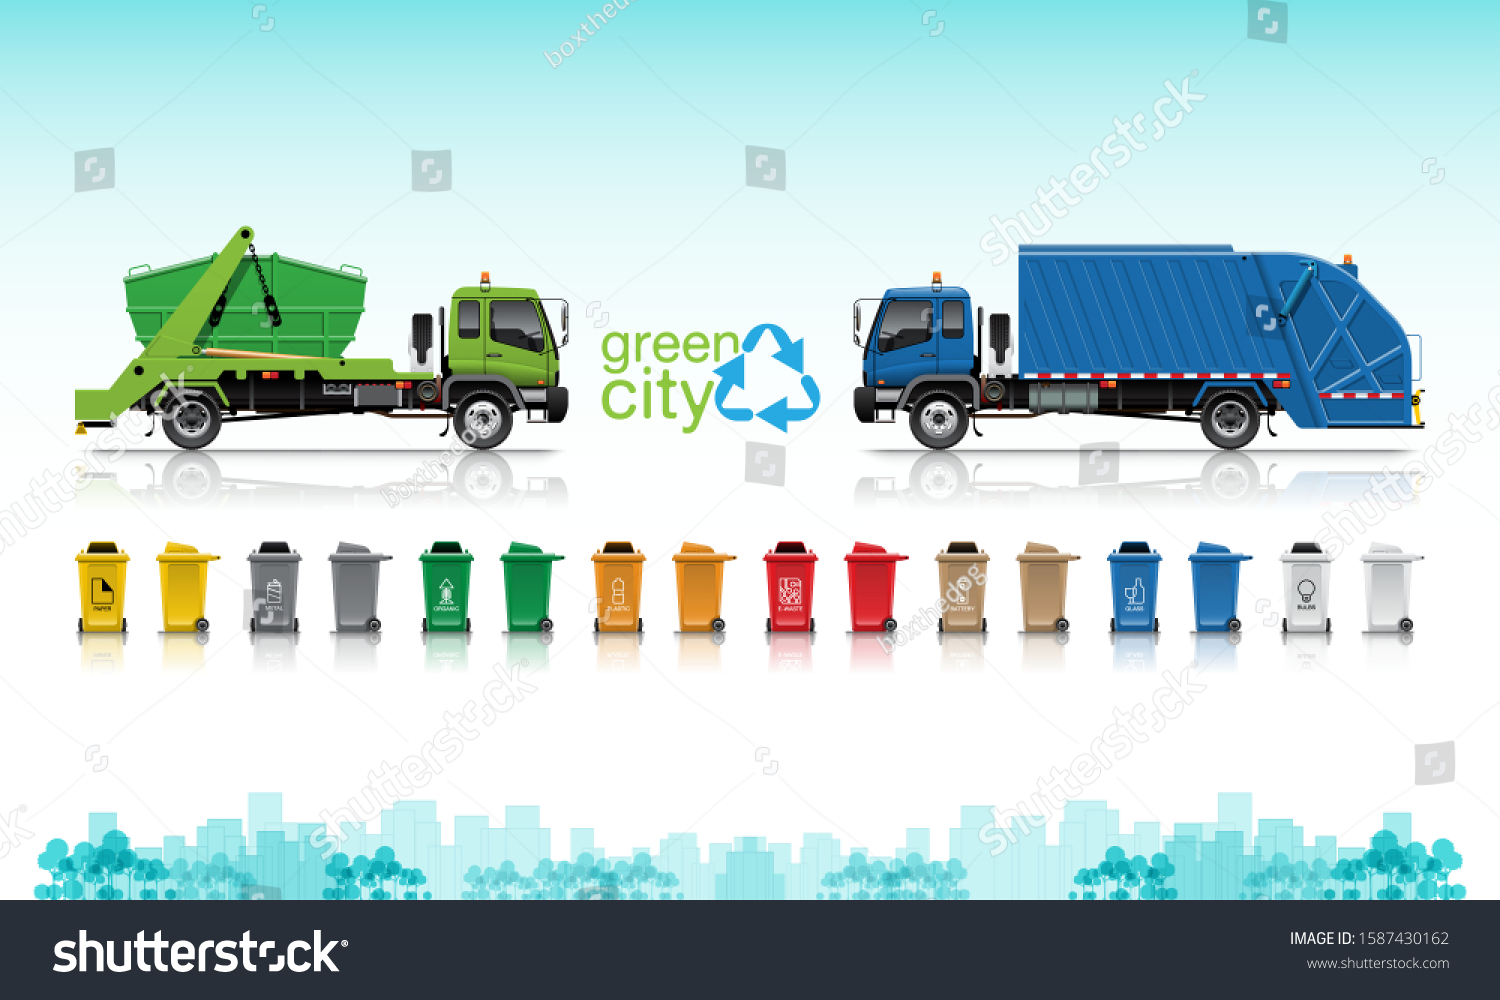 SVG of VECTOR EPS10 - green lugger truck and blue garbage truck with logo design 